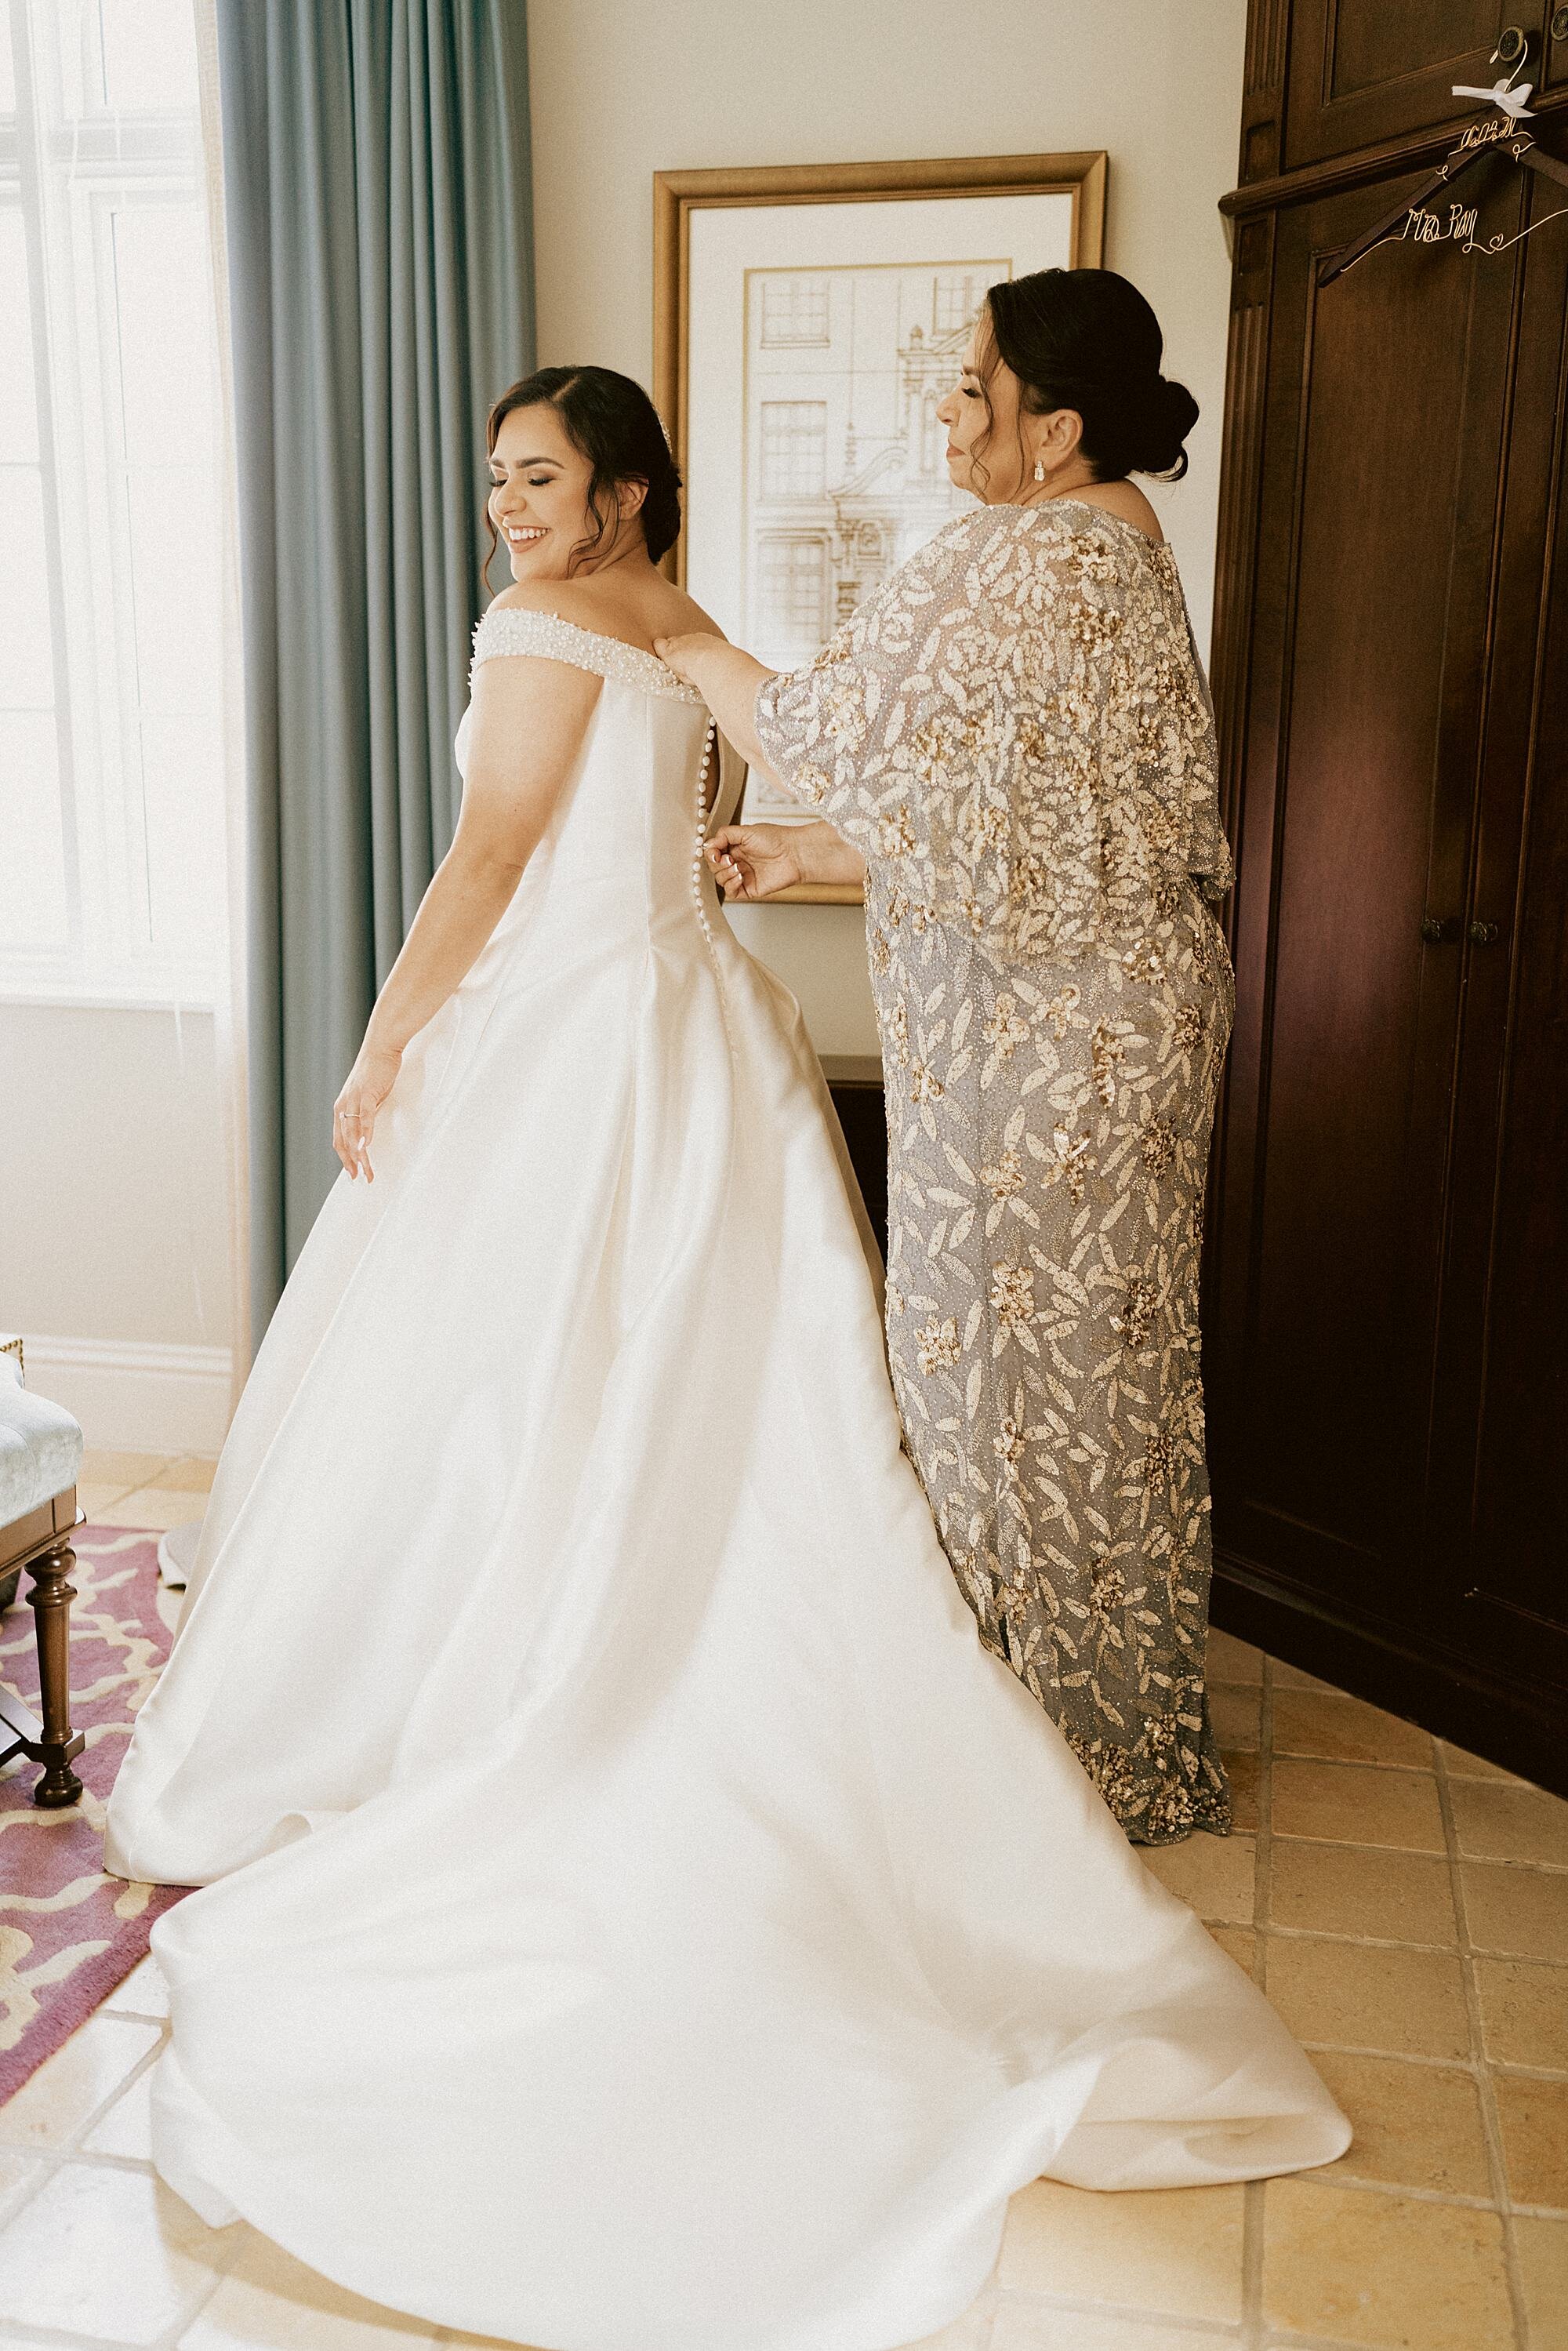 Coral Gables Country Club Wedding - Michelle Gonzalez Photography - Andrea and Andres-157.jpg